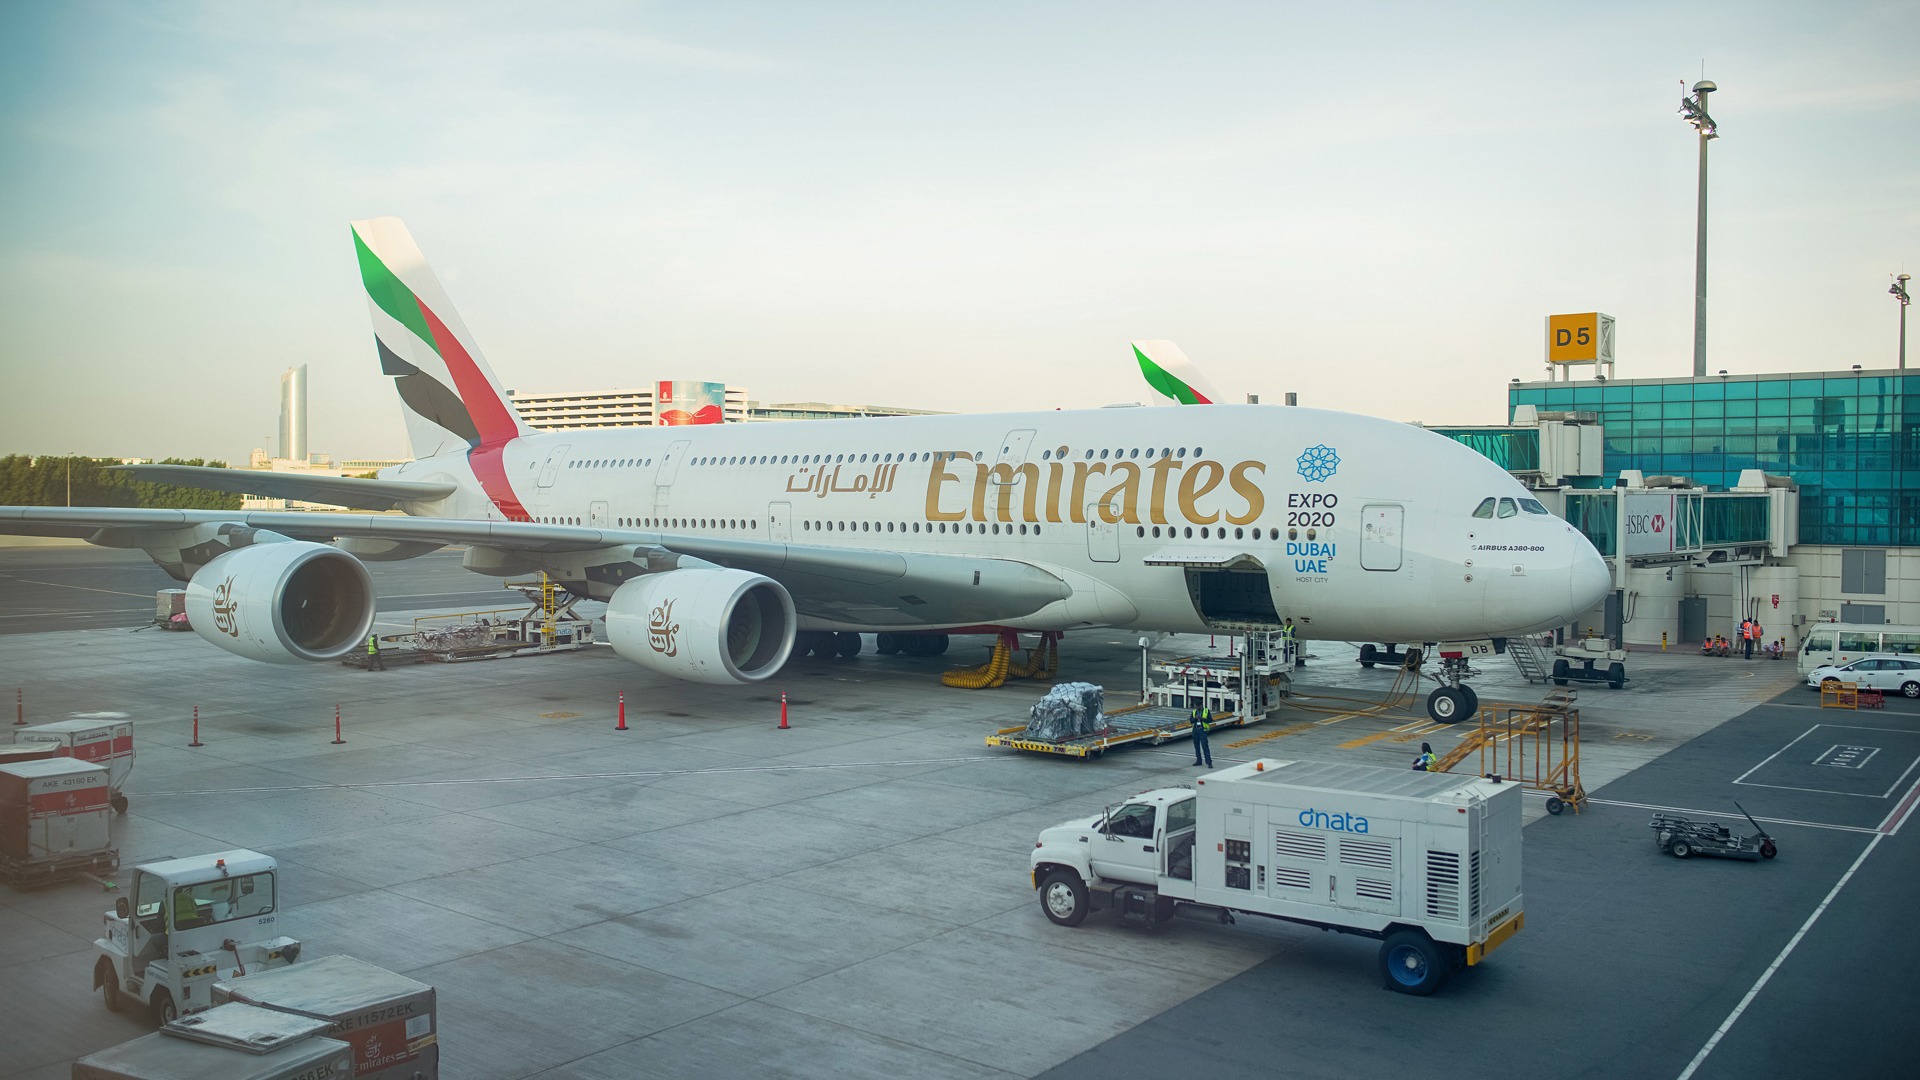 Double-deck Airbus A380 - 800 Emirates Airlines preparing for takeoff